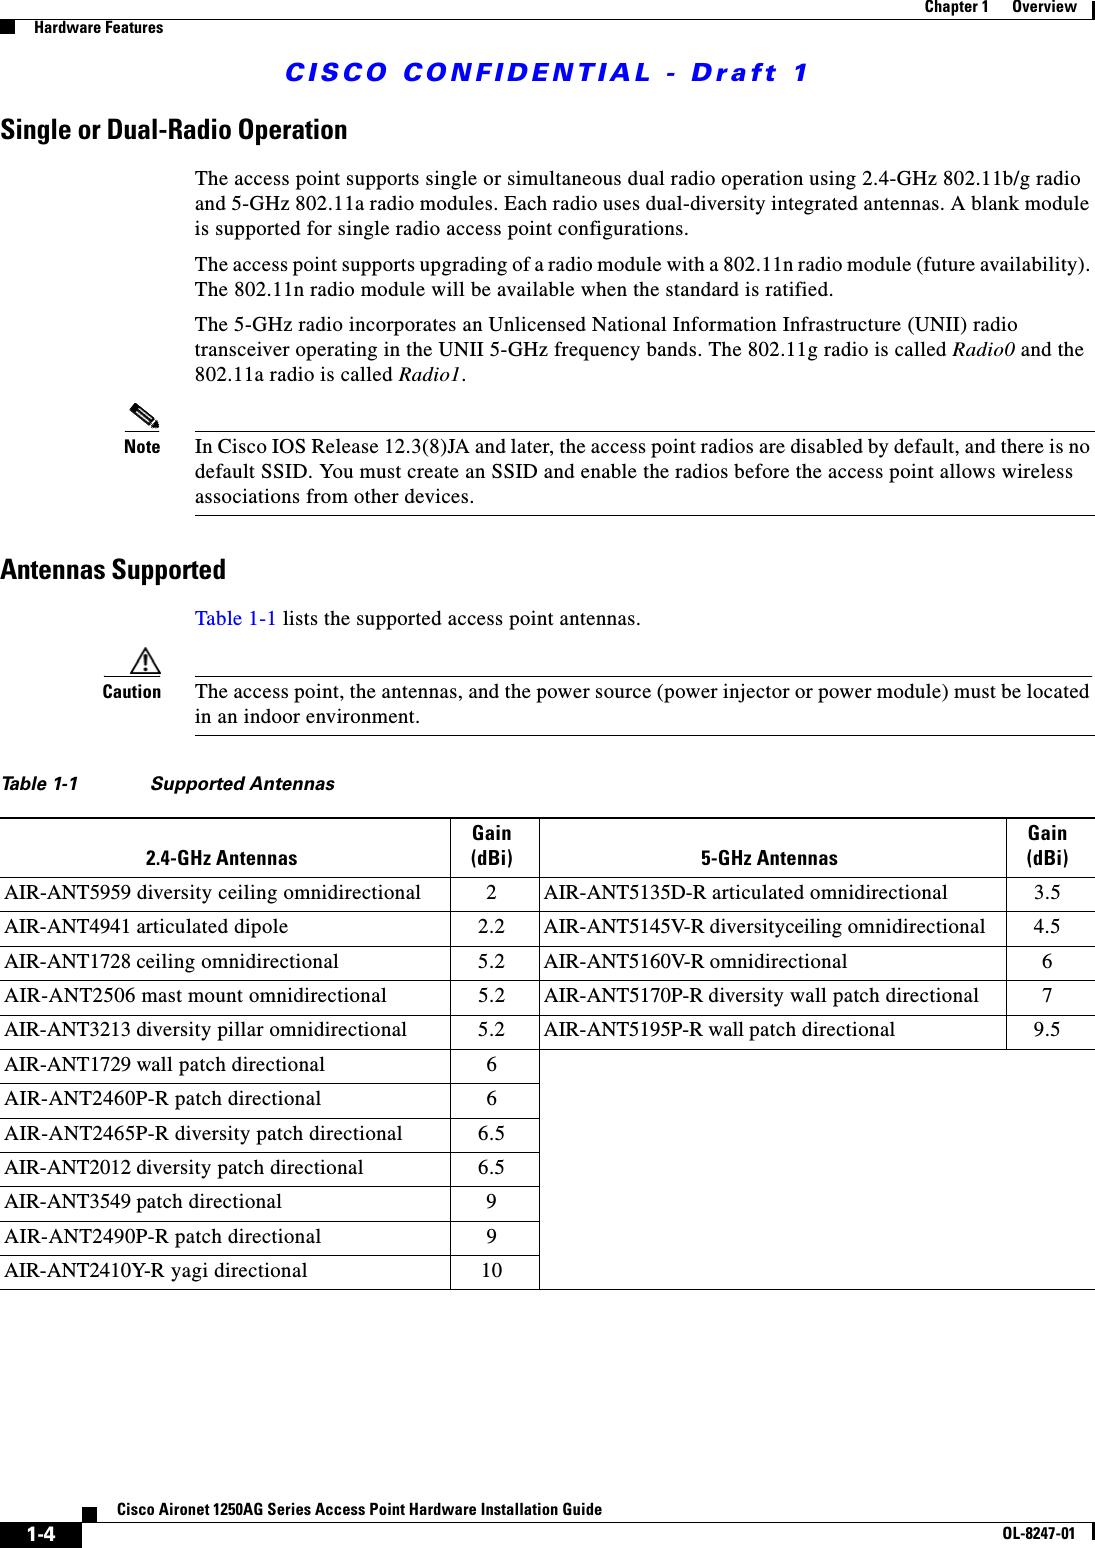 CISCO CONFIDENTIAL - Draft 11-4Cisco Aironet 1250AG Series Access Point Hardware Installation GuideOL-8247-01Chapter 1      OverviewHardware FeaturesSingle or Dual-Radio OperationThe access point supports single or simultaneous dual radio operation using 2.4-GHz 802.11b/g radio and 5-GHz 802.11a radio modules. Each radio uses dual-diversity integrated antennas. A blank module is supported for single radio access point configurations.The access point supports upgrading of a radio module with a 802.11n radio module (future availability). The 802.11n radio module will be available when the standard is ratified.The 5-GHz radio incorporates an Unlicensed National Information Infrastructure (UNII) radio transceiver operating in the UNII 5-GHz frequency bands. The 802.11g radio is called Radio0 and the 802.11a radio is called Radio1.Note In Cisco IOS Release 12.3(8)JA and later, the access point radios are disabled by default, and there is no default SSID. You must create an SSID and enable the radios before the access point allows wireless associations from other devices. Antennas SupportedTable 1-1 lists the supported access point antennas.Caution The access point, the antennas, and the power source (power injector or power module) must be located in an indoor environment.Table 1-1 Supported Antennas2.4-GHz AntennasGain (dBi) 5-GHz AntennasGain (dBi)AIR-ANT5959 diversity ceiling omnidirectional 2 AIR-ANT5135D-R articulated omnidirectional 3.5AIR-ANT4941 articulated dipole 2.2 AIR-ANT5145V-R diversityceiling omnidirectional 4.5AIR-ANT1728 ceiling omnidirectional 5.2 AIR-ANT5160V-R omnidirectional 6AIR-ANT2506 mast mount omnidirectional 5.2 AIR-ANT5170P-R diversity wall patch directional 7AIR-ANT3213 diversity pillar omnidirectional 5.2 AIR-ANT5195P-R wall patch directional 9.5AIR-ANT1729 wall patch directional 6AIR-ANT2460P-R patch directional 6AIR-ANT2465P-R diversity patch directional 6.5AIR-ANT2012 diversity patch directional 6.5AIR-ANT3549 patch directional 9AIR-ANT2490P-R patch directional 9AIR-ANT2410Y-R yagi directional 10